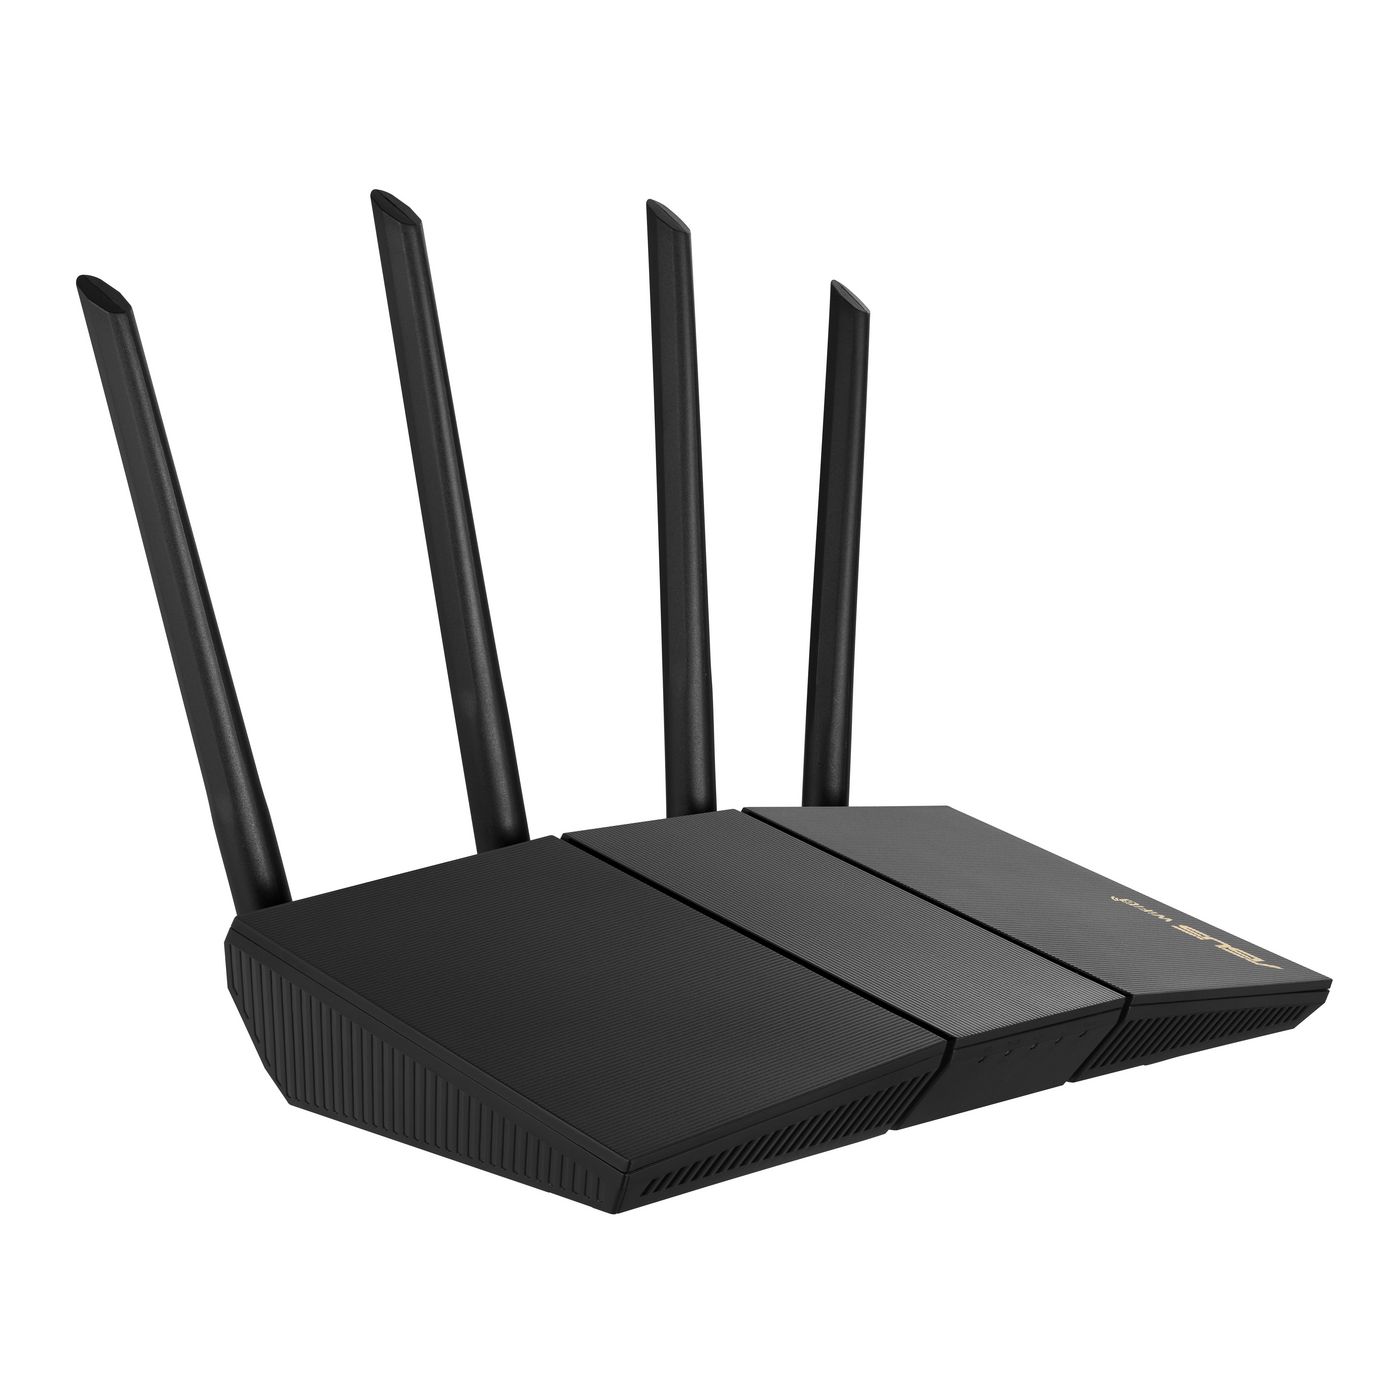 Asus 90IG06Z0-MO3C00 W128291859 Rt-Ax57 Wireless Router 